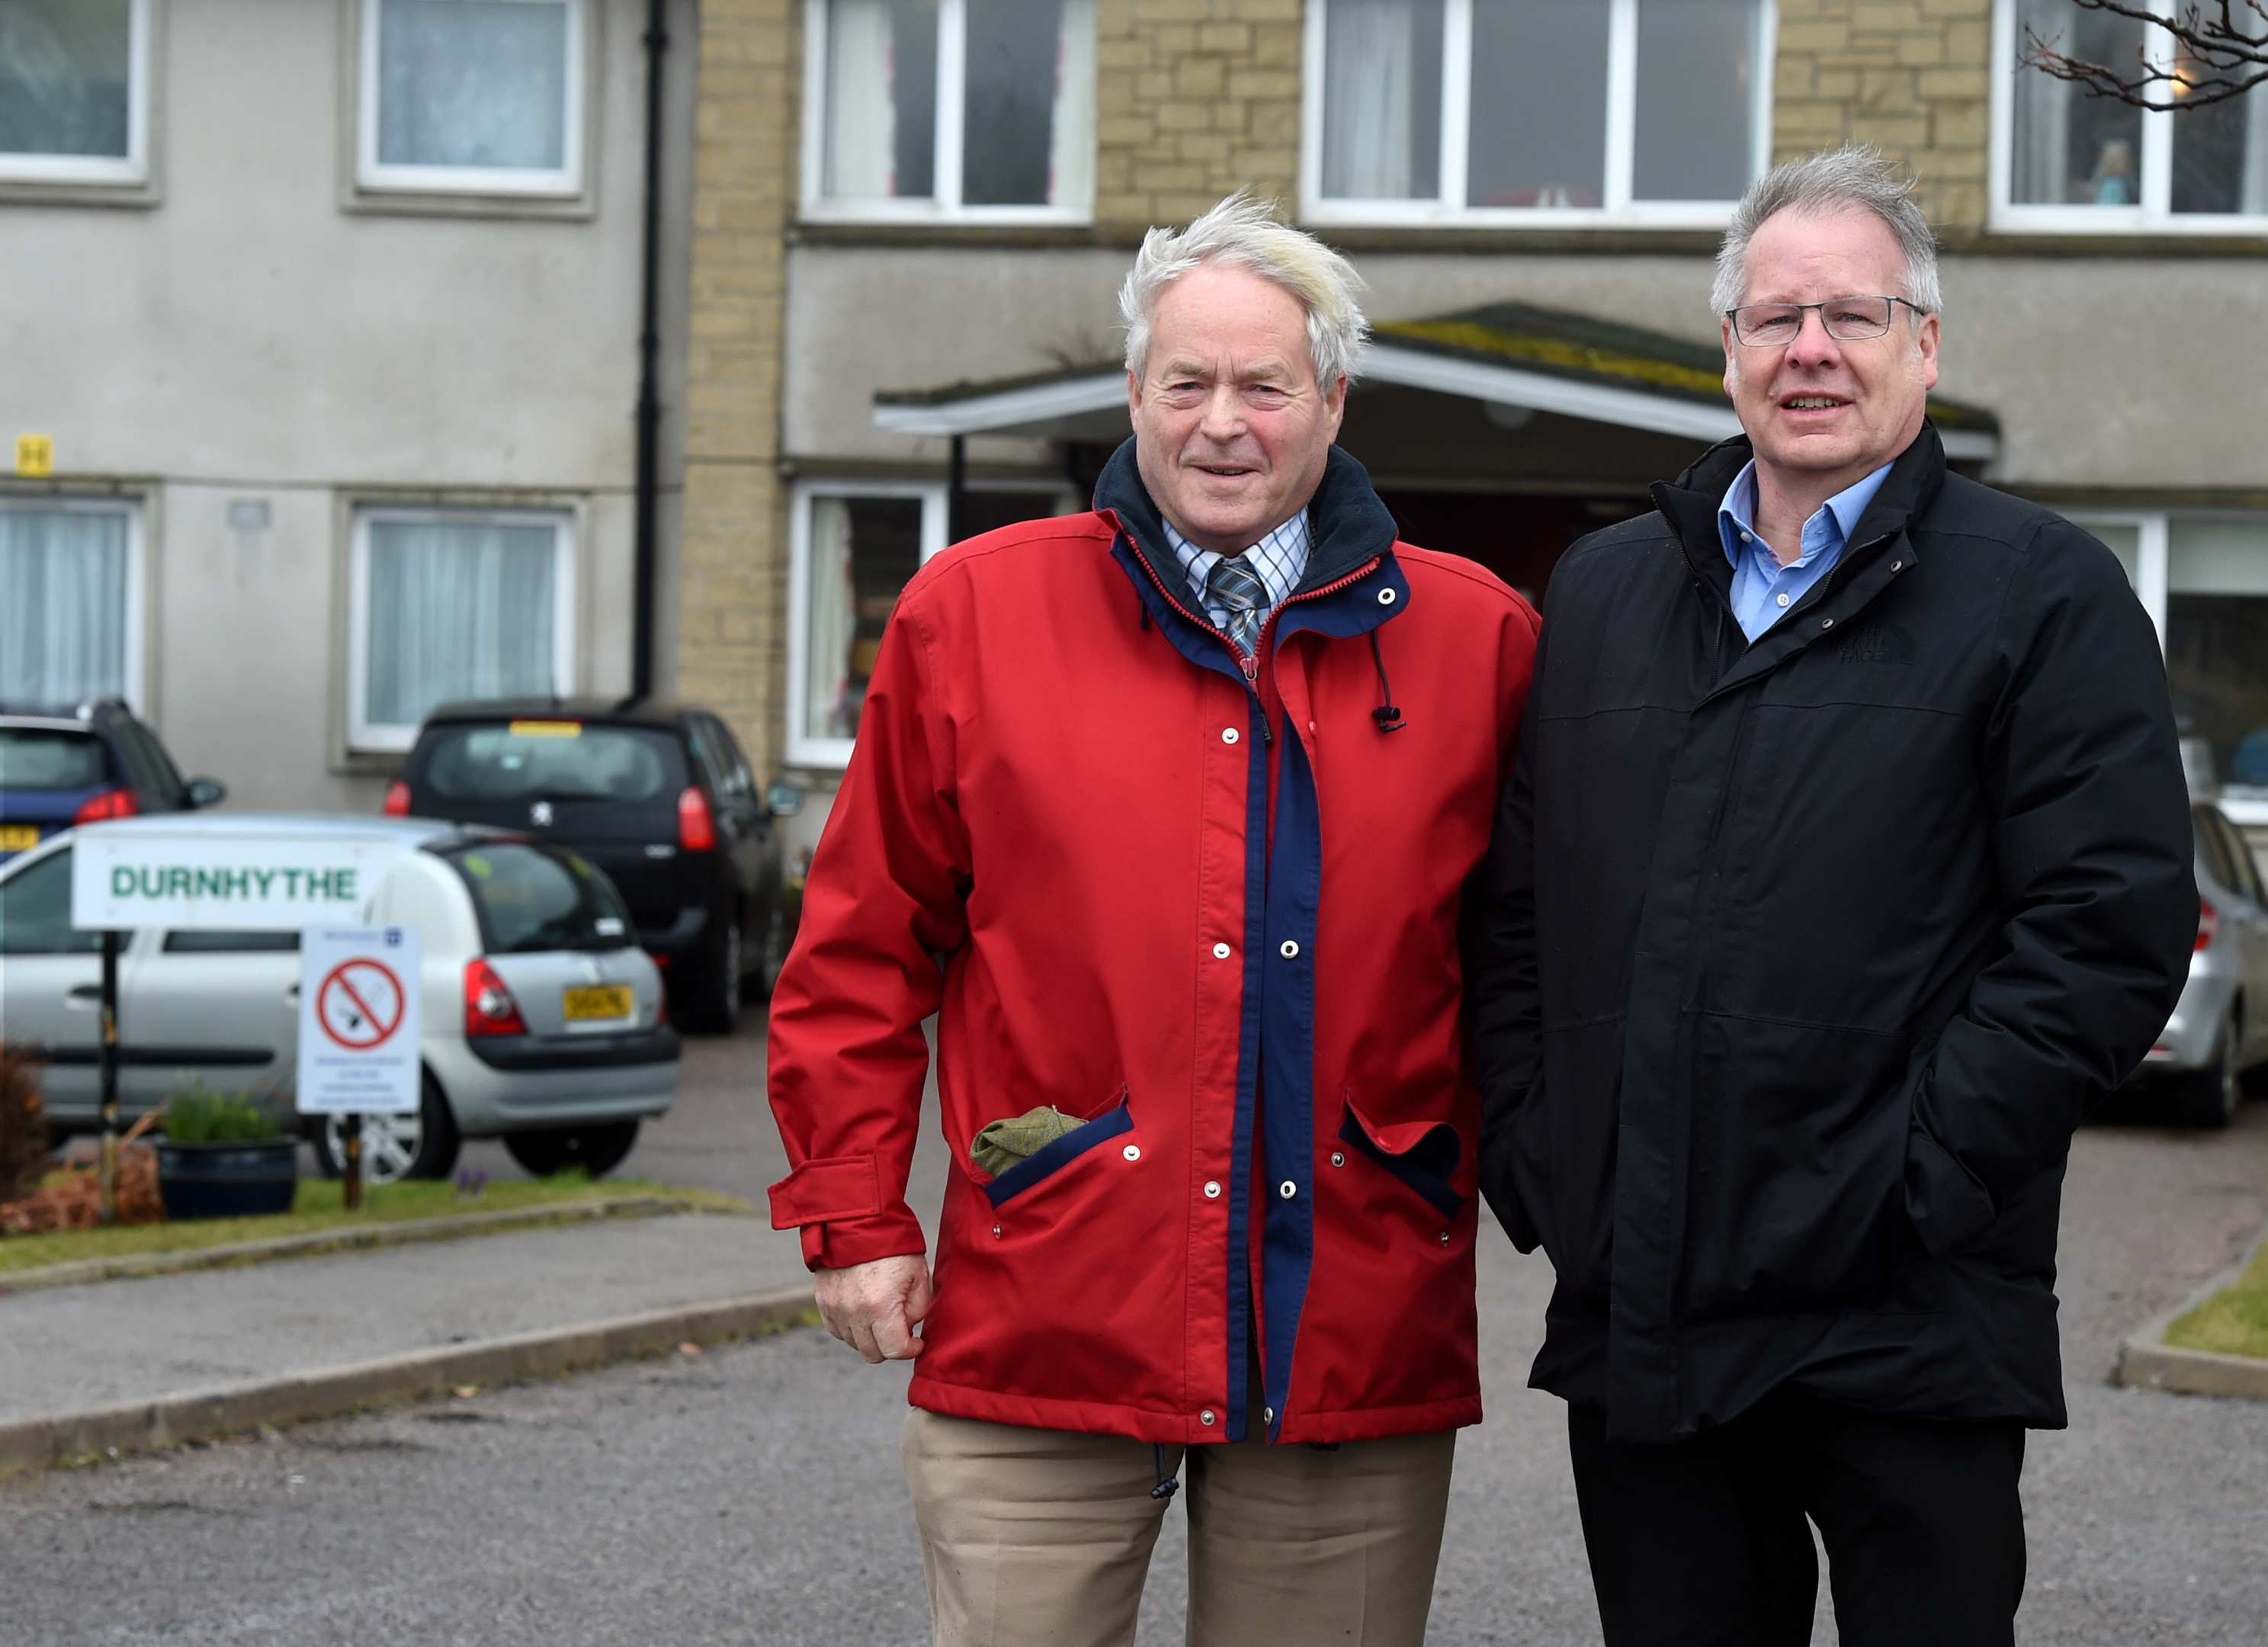 Councillors, Mike Roy, left and John Cox at Durnblythe Care home, Portsoy. 
Picture by Jim Irvine